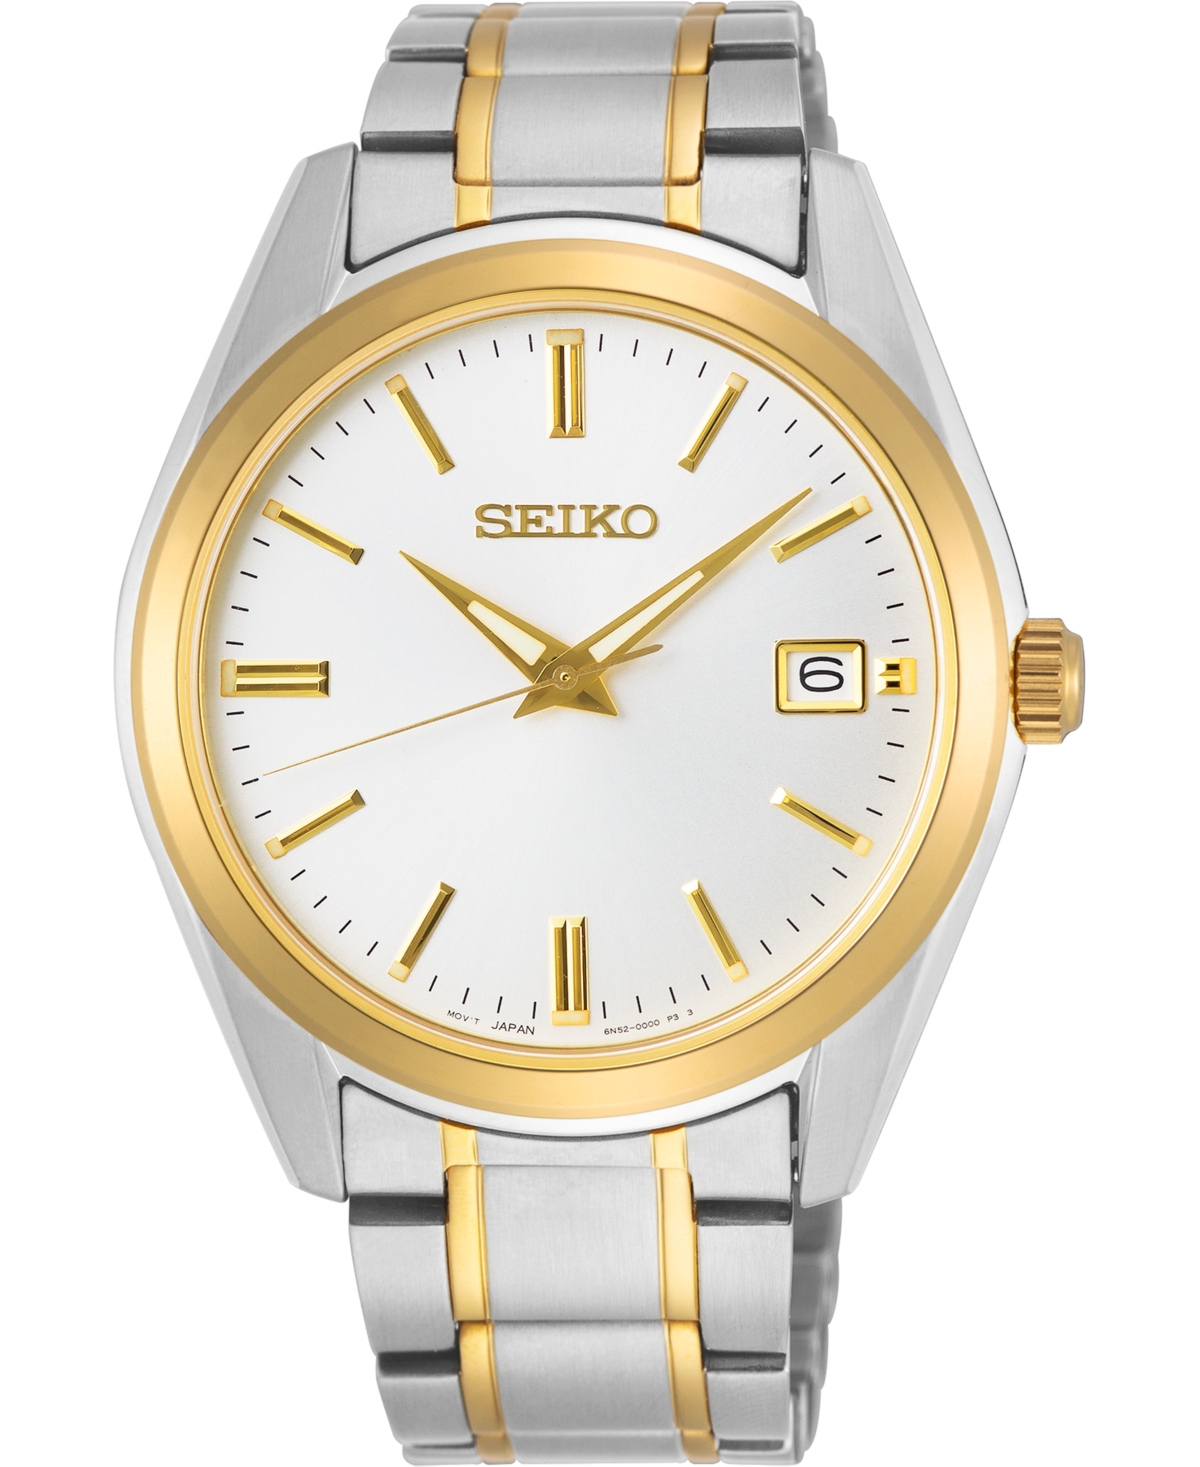 Seiko Men's Essentials Two-Tone Stainless Steel Bracelet Watch  &  Reviews - All Watches - Jewelry & Watches - Macy's